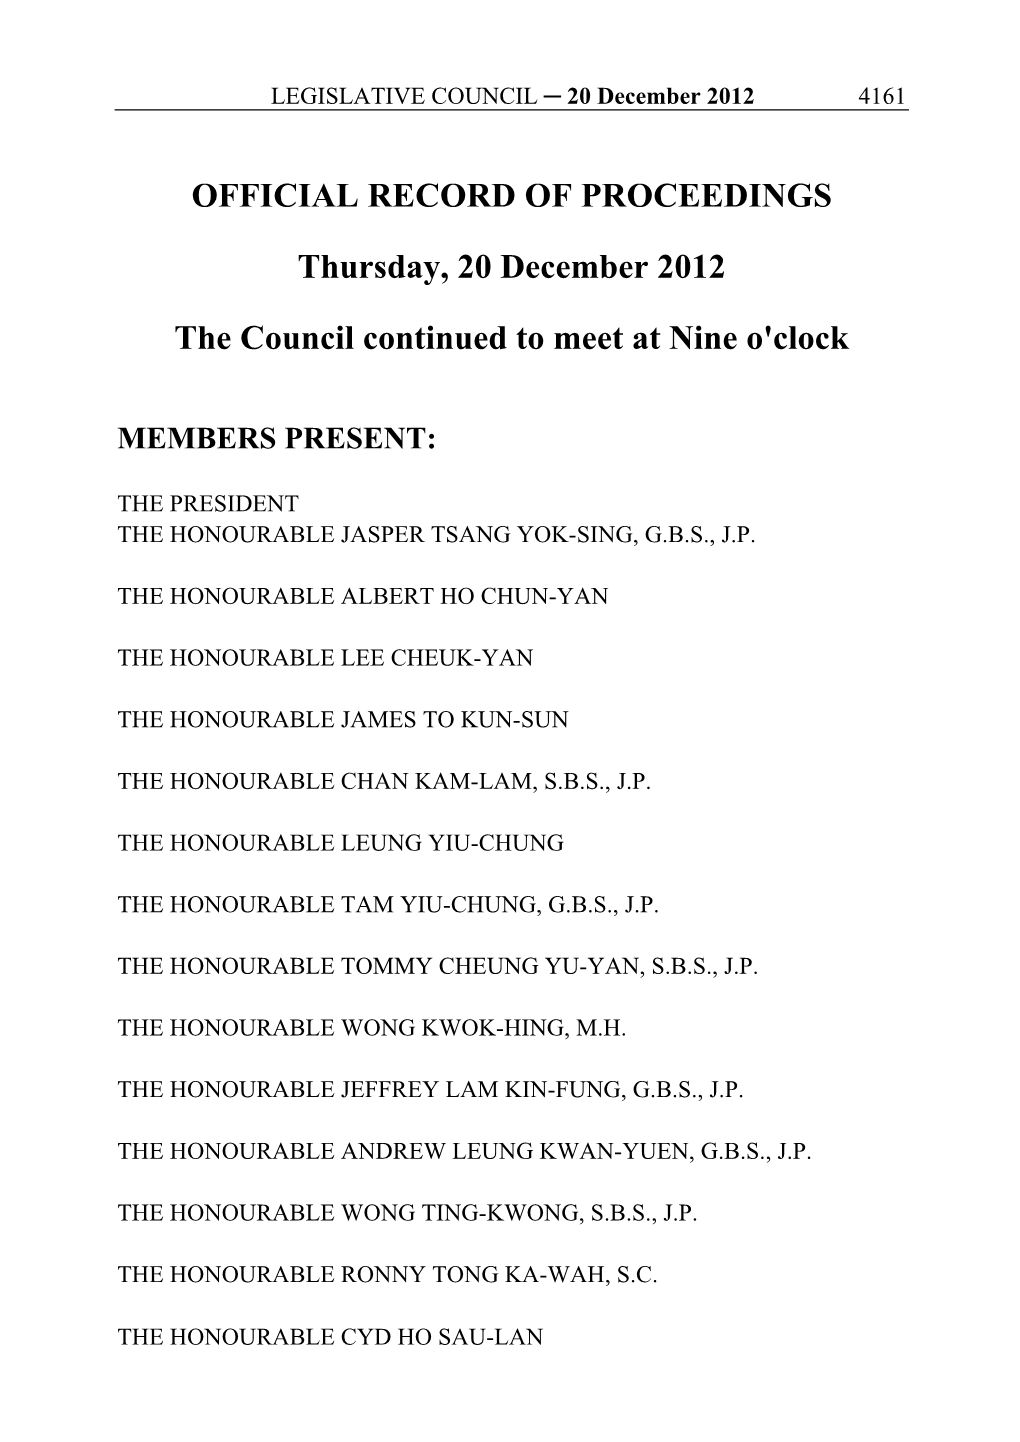 OFFICIAL RECORD of PROCEEDINGS Thursday, 20